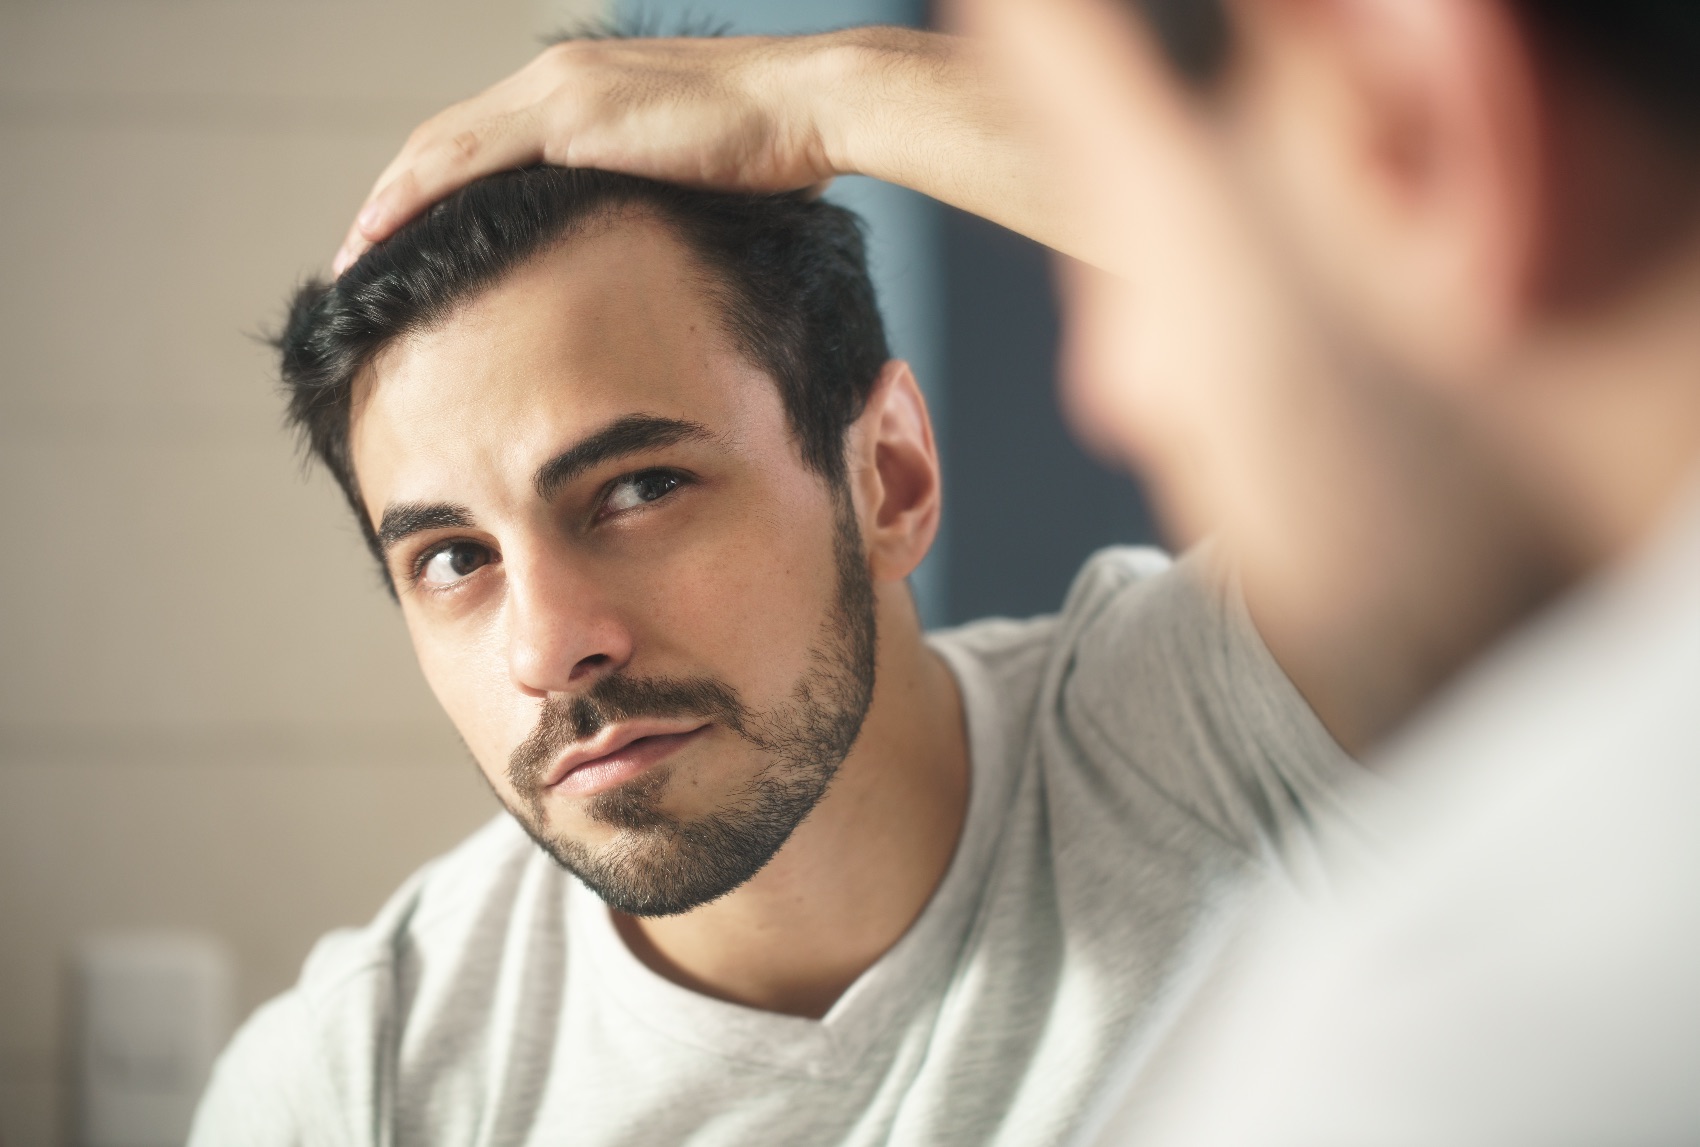 What causes Male Baldness?